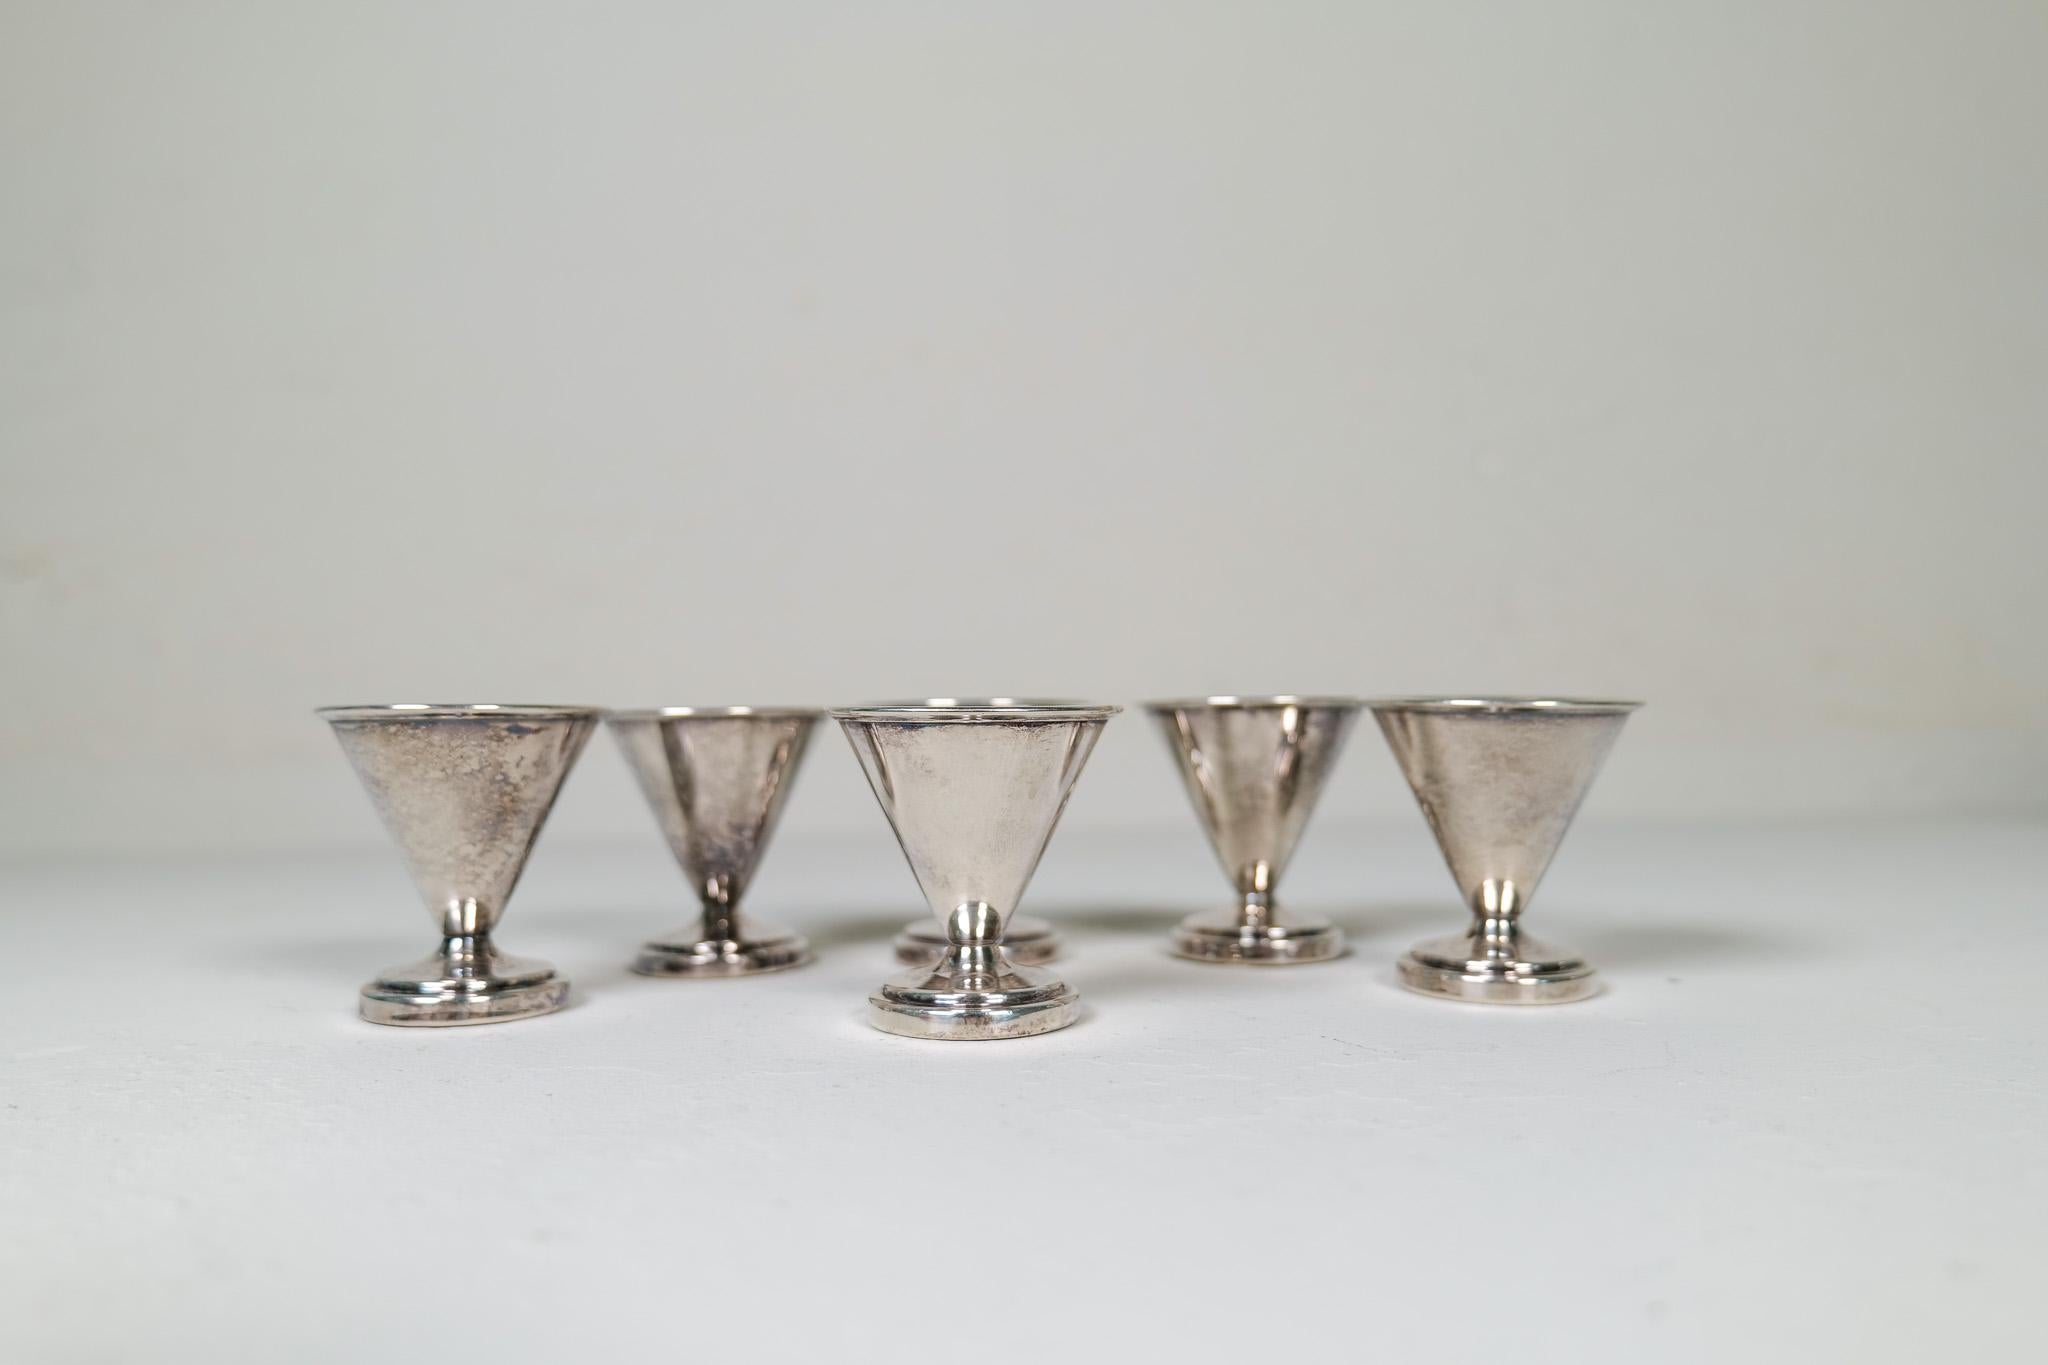 Art Deco Cocktail Shaker with 6 Small Glasses by Folke Arström, Sweden For Sale 5